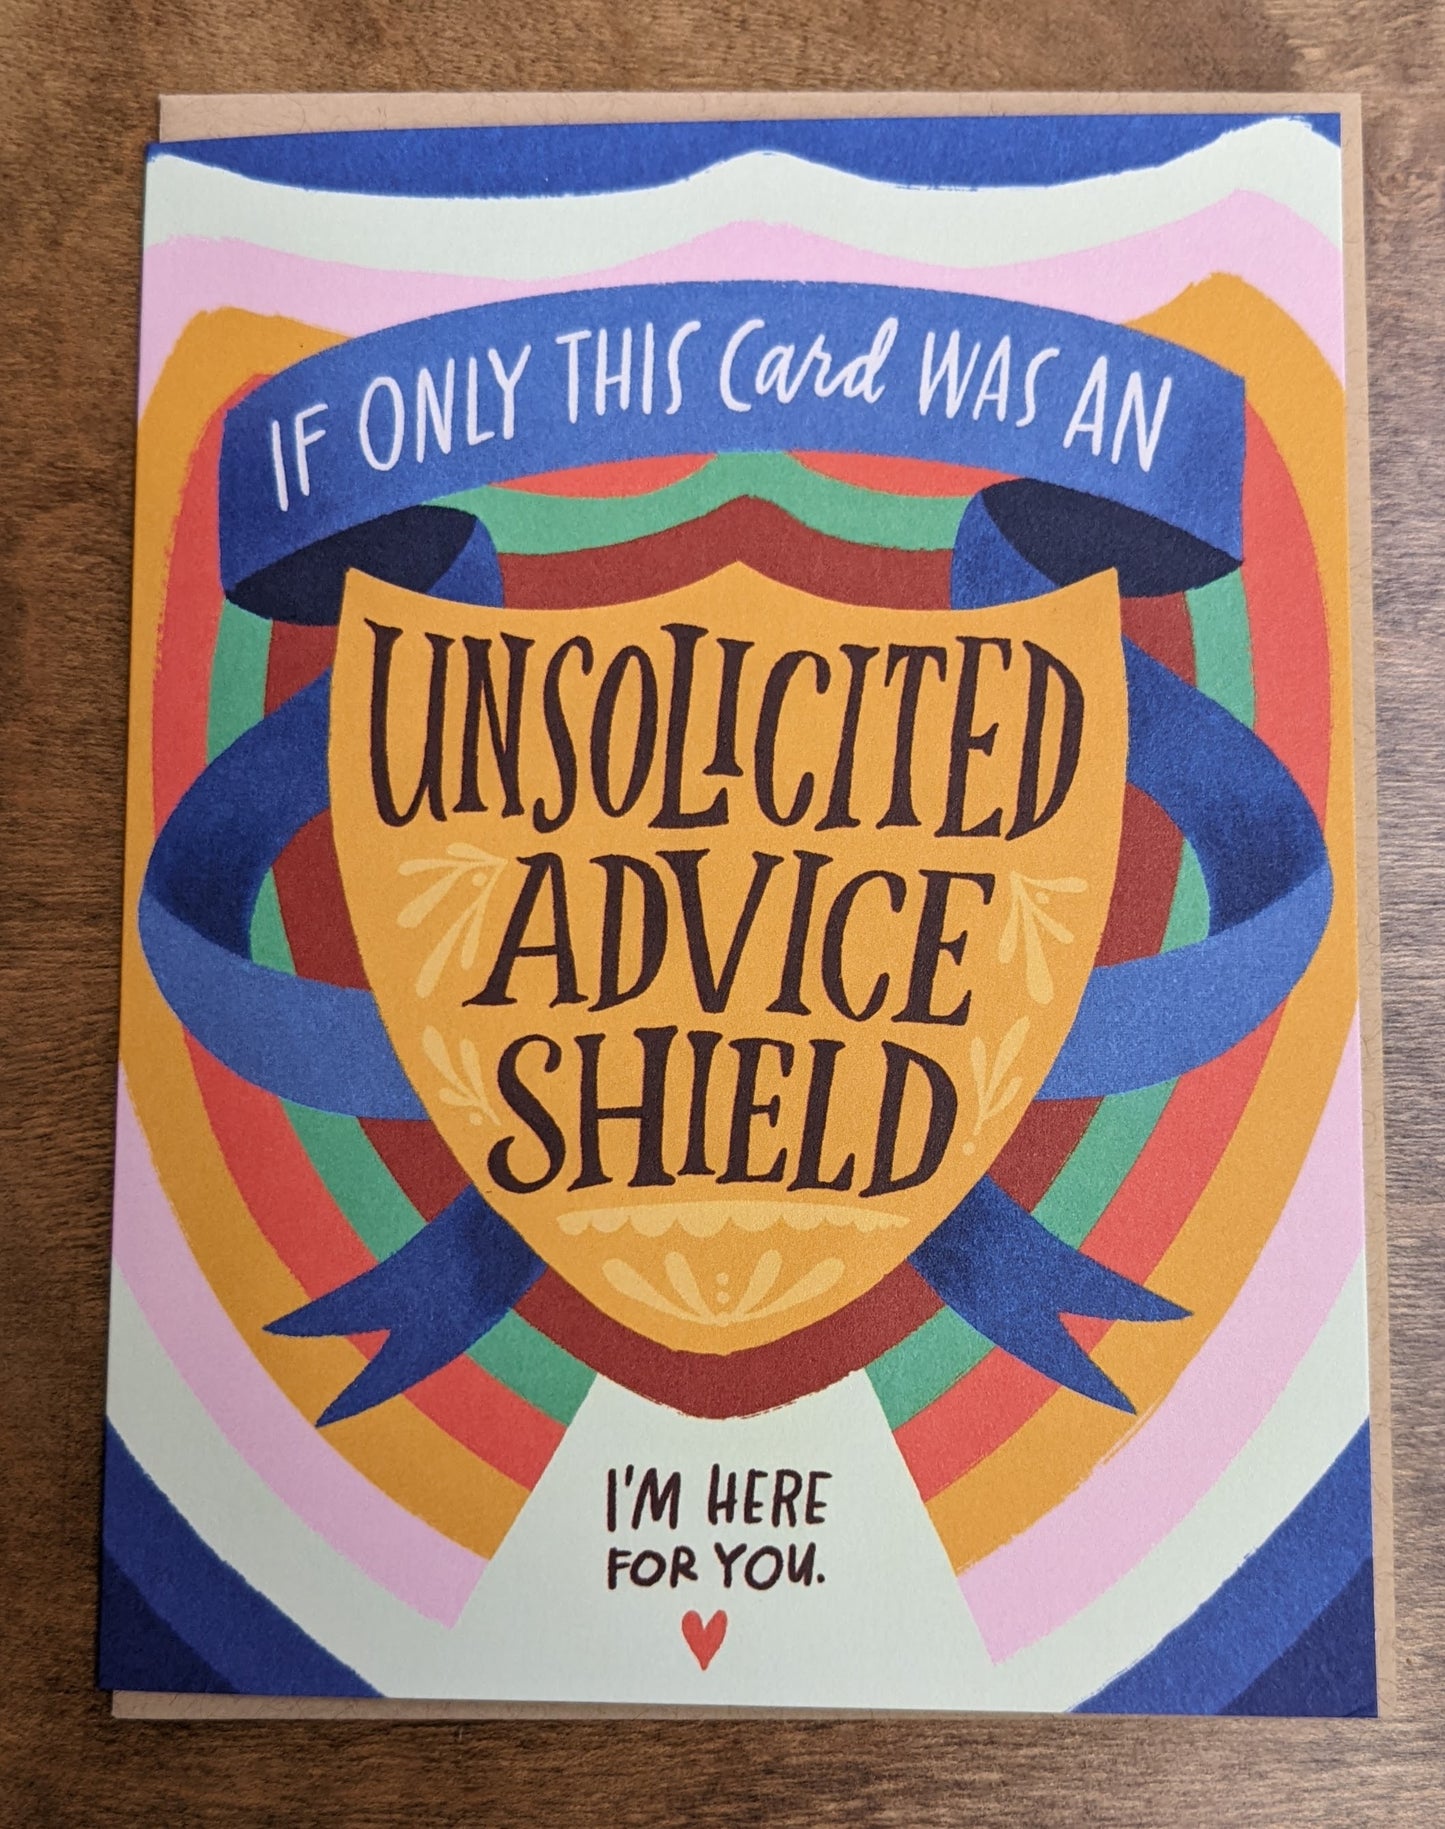 If only this card was an unsolicited Advice Shield, I'm here for you card by Emily McDowell